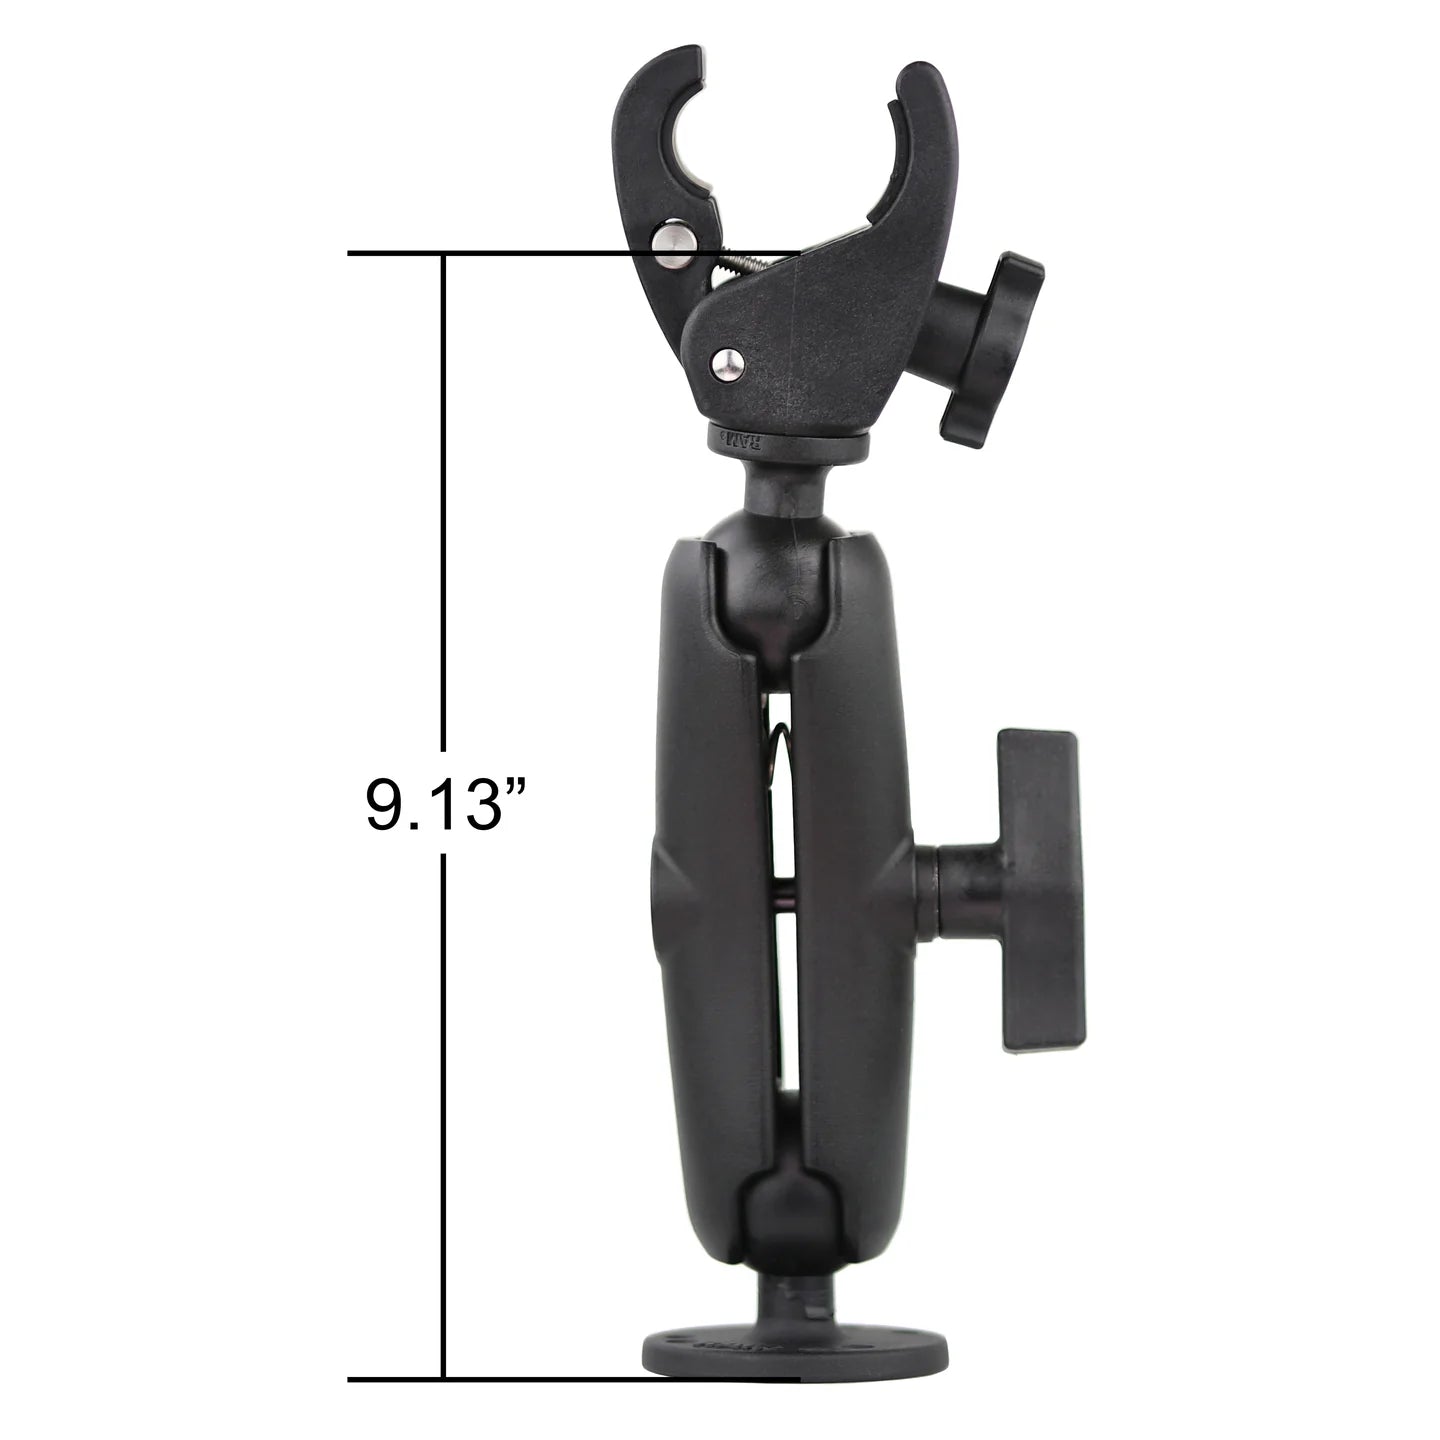 RAM Small Tough-Claw™ Base with Double Socket Arm and 1.5" Round Base Adapter (RAP-400-202U)